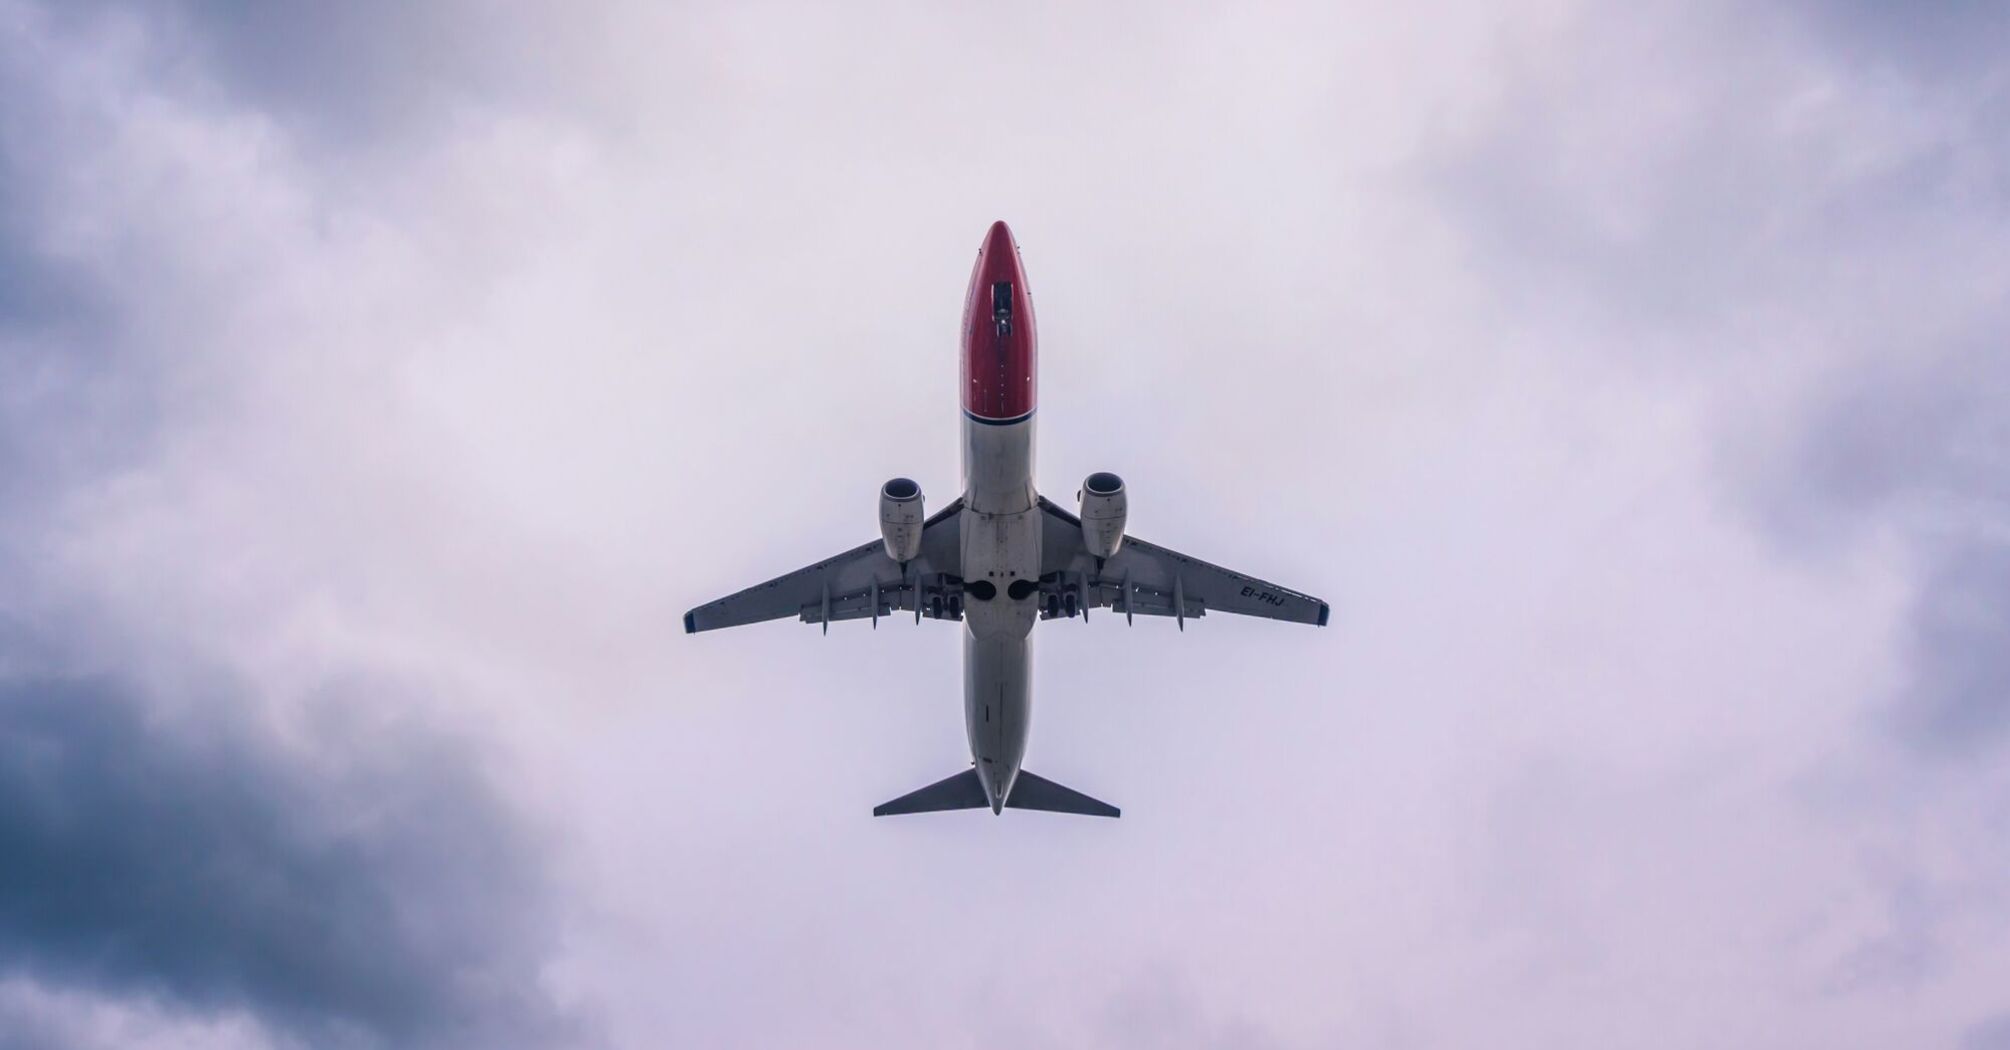 Norwegian Airline plane in the air